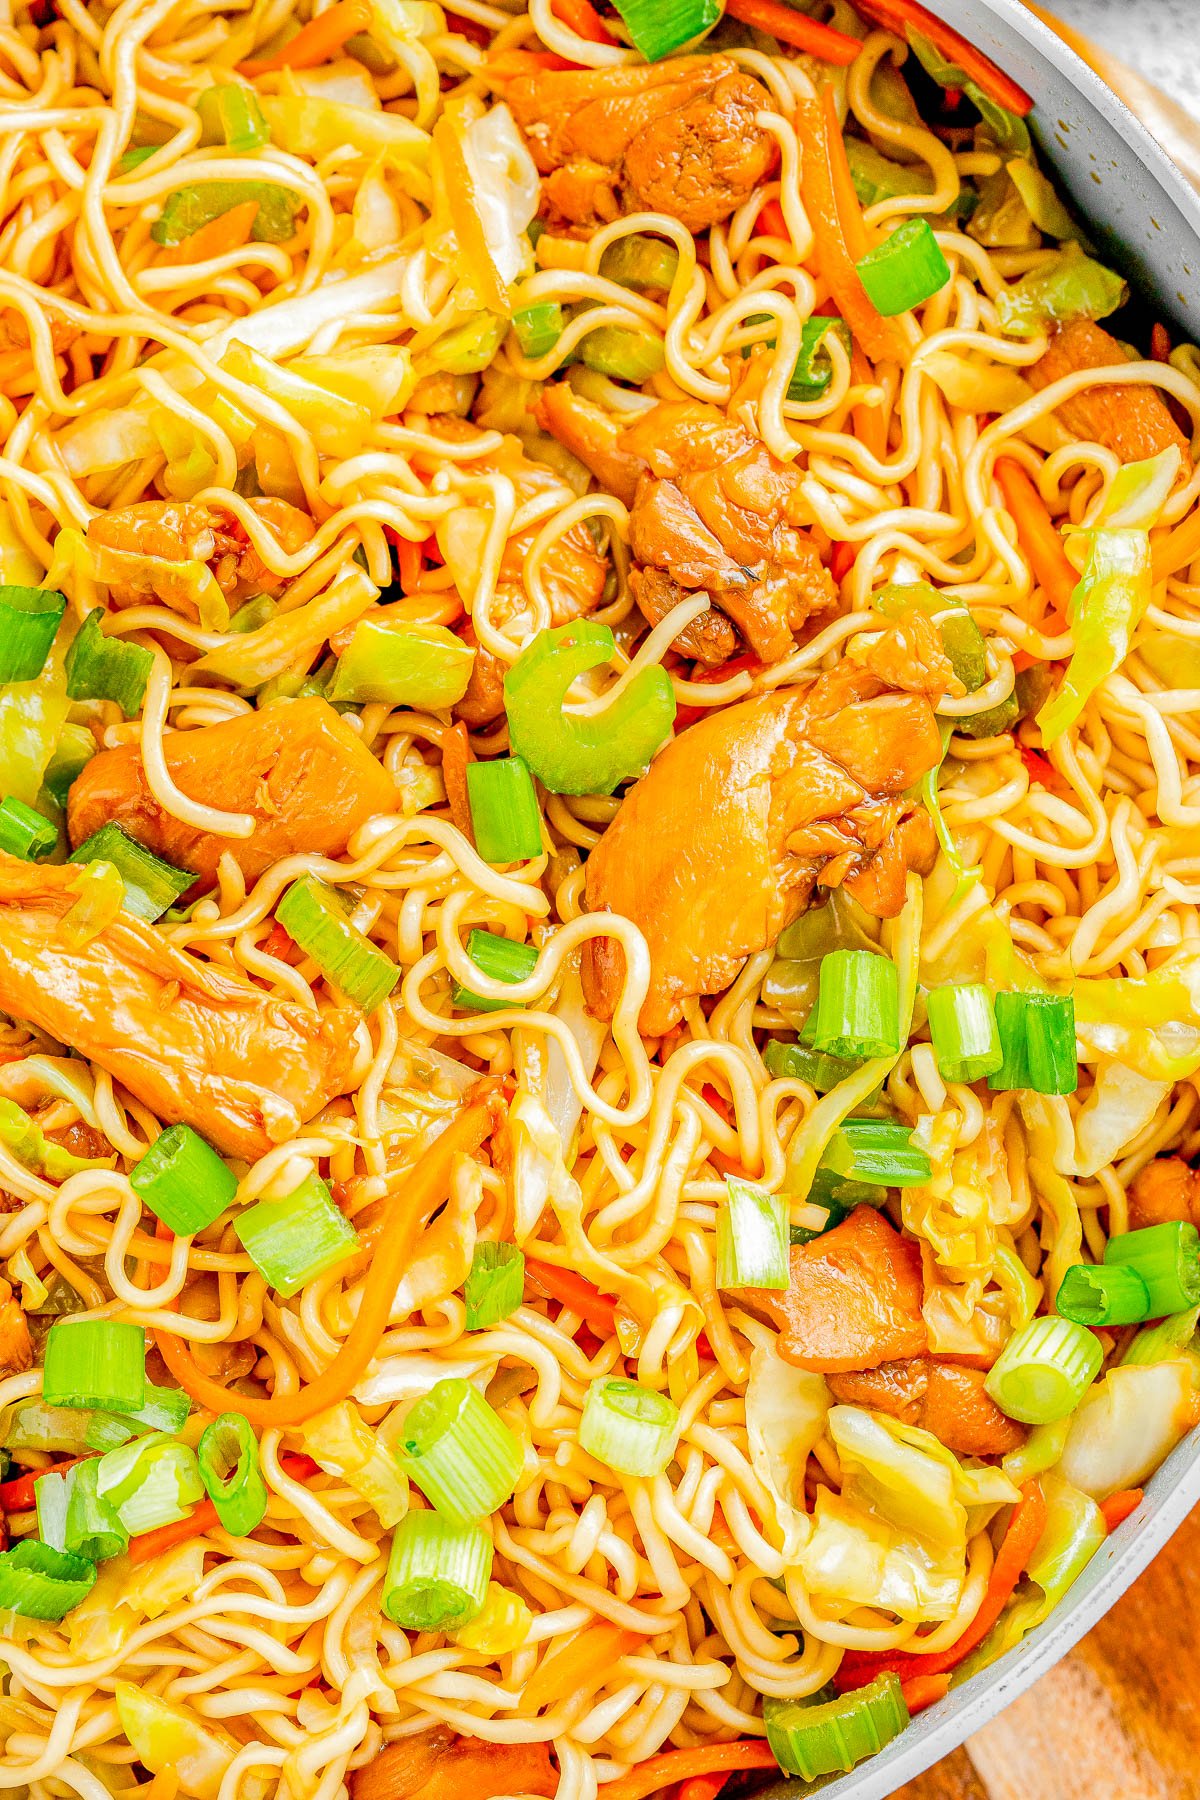 Chicken Chow Mein — Chewy chow mein noodles, crisp-tender veggies, and juicy chicken are stir-fried in a sesame-soy sauce! It’s a SIMPLE and FAST recipe that anyone can make. It's cheaper than ordering take out, your family will be impressed, and you'll love how EASY it is to prepare! 